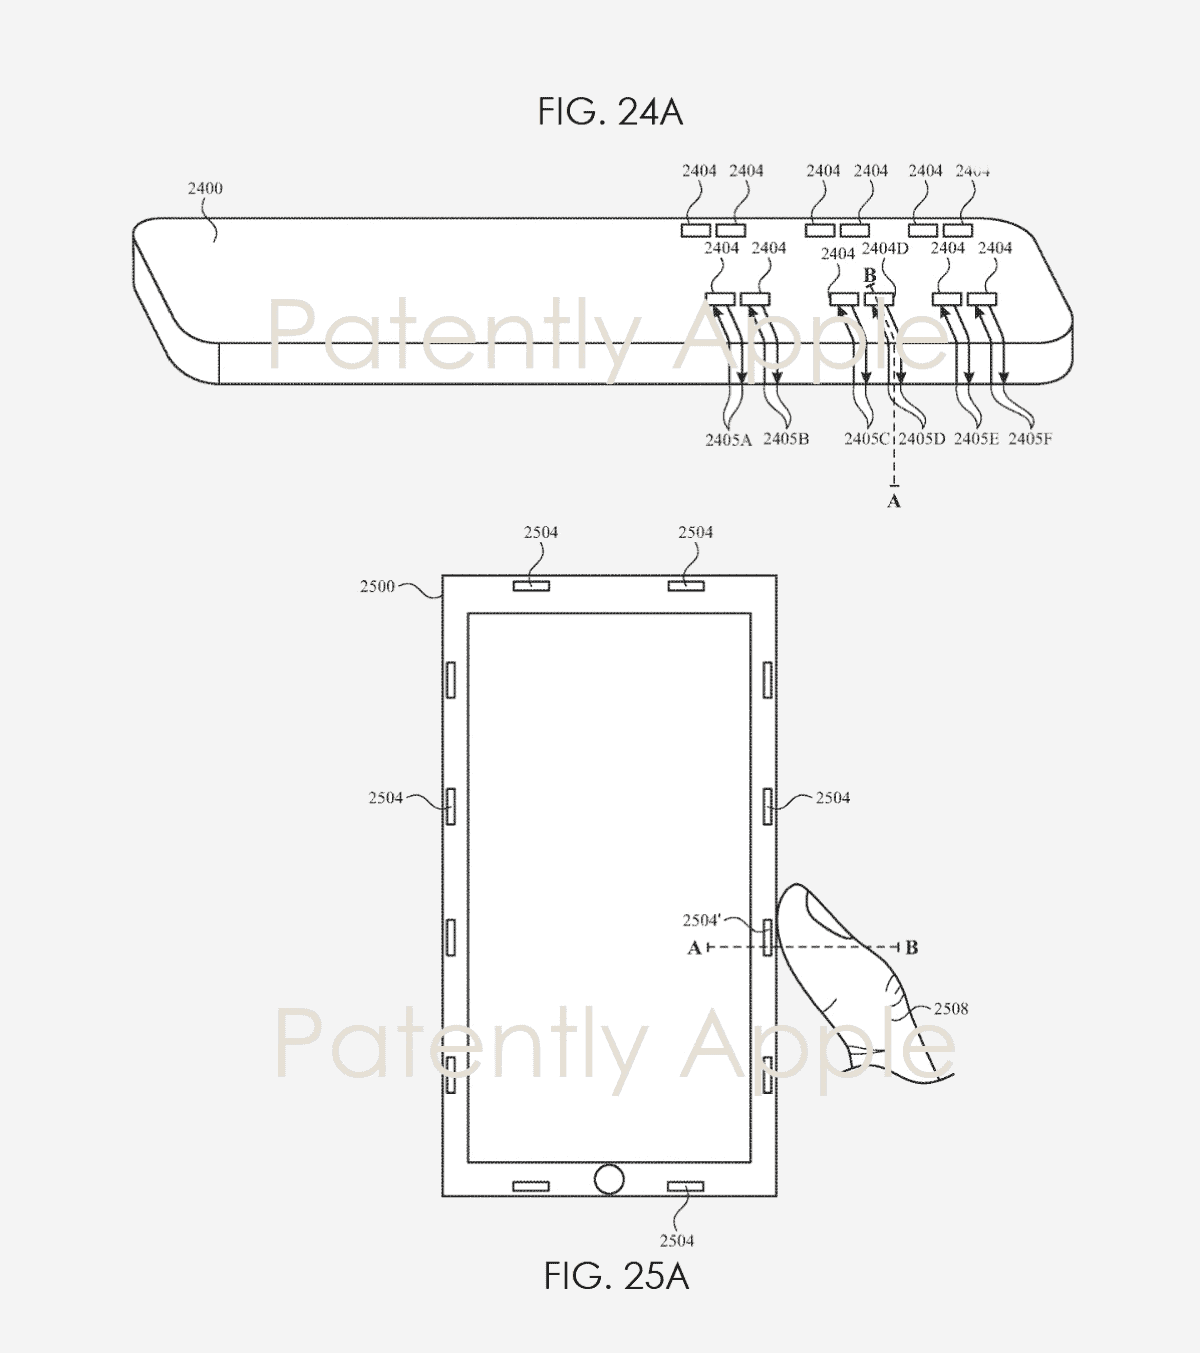 Patent showing acoustic touch with a finger or Apple Pencil.